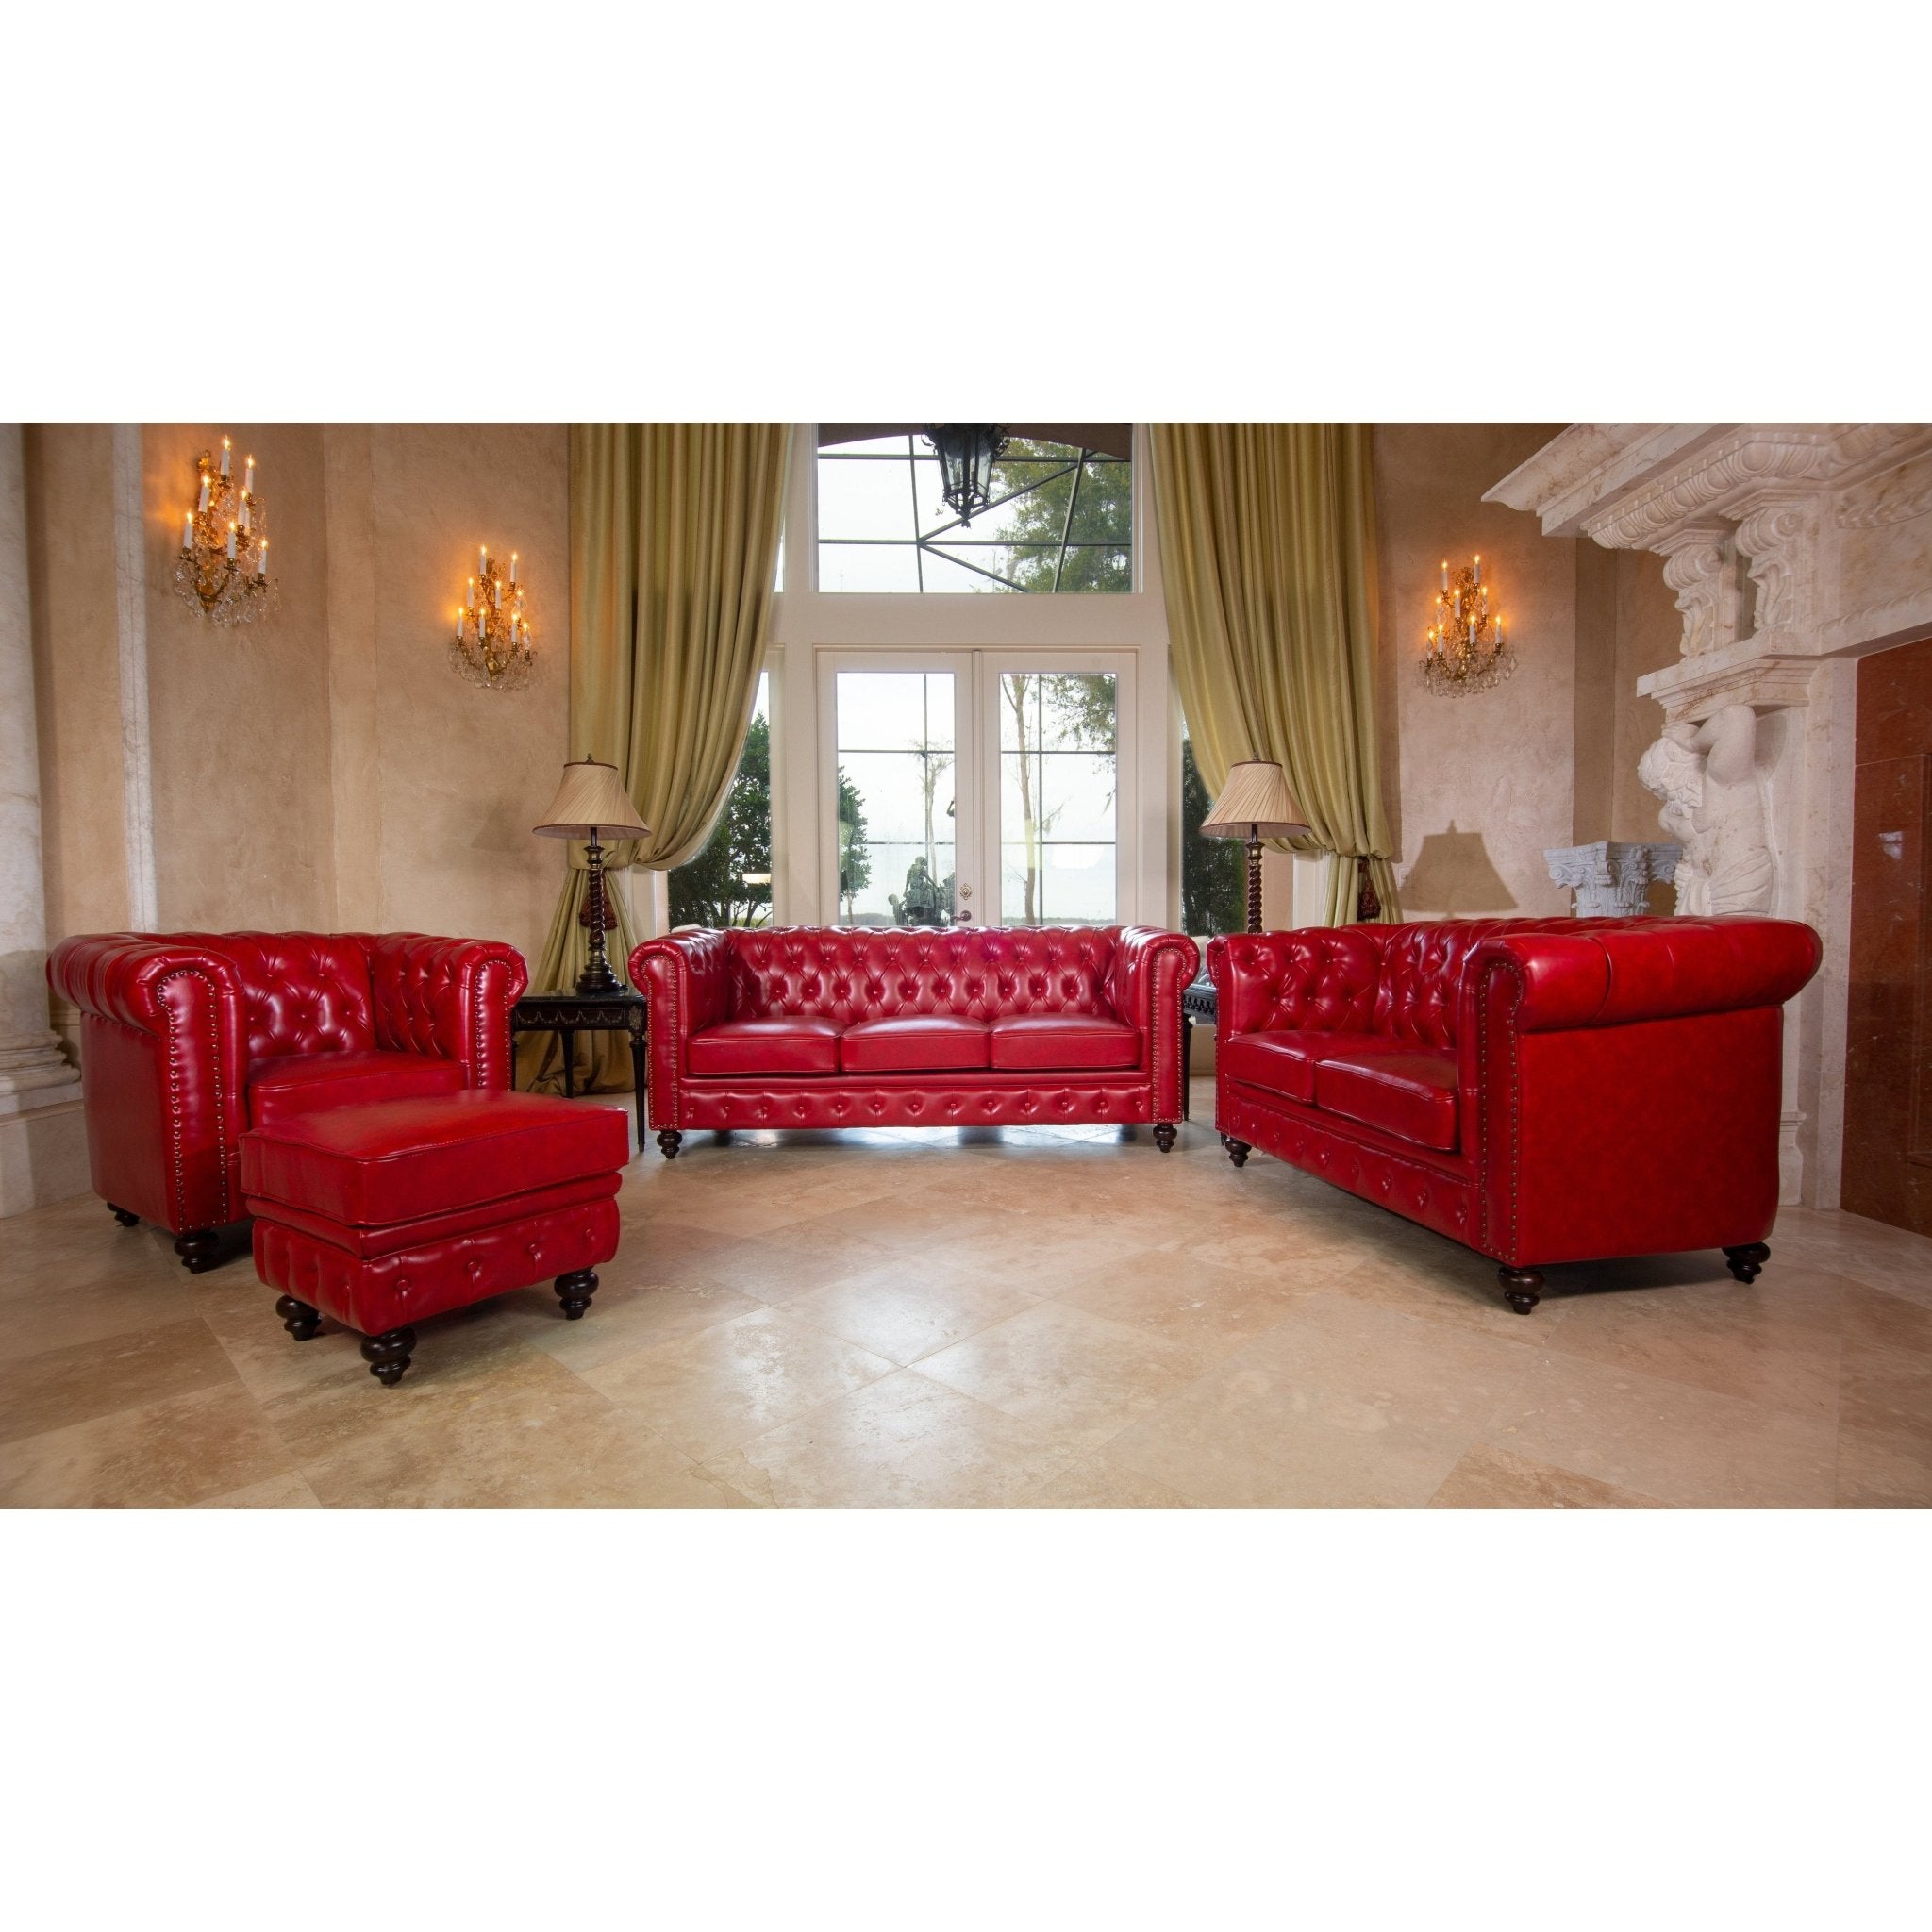 AFD Home Classic Chesterfield Red Sofa Set of 3 - New Star Living